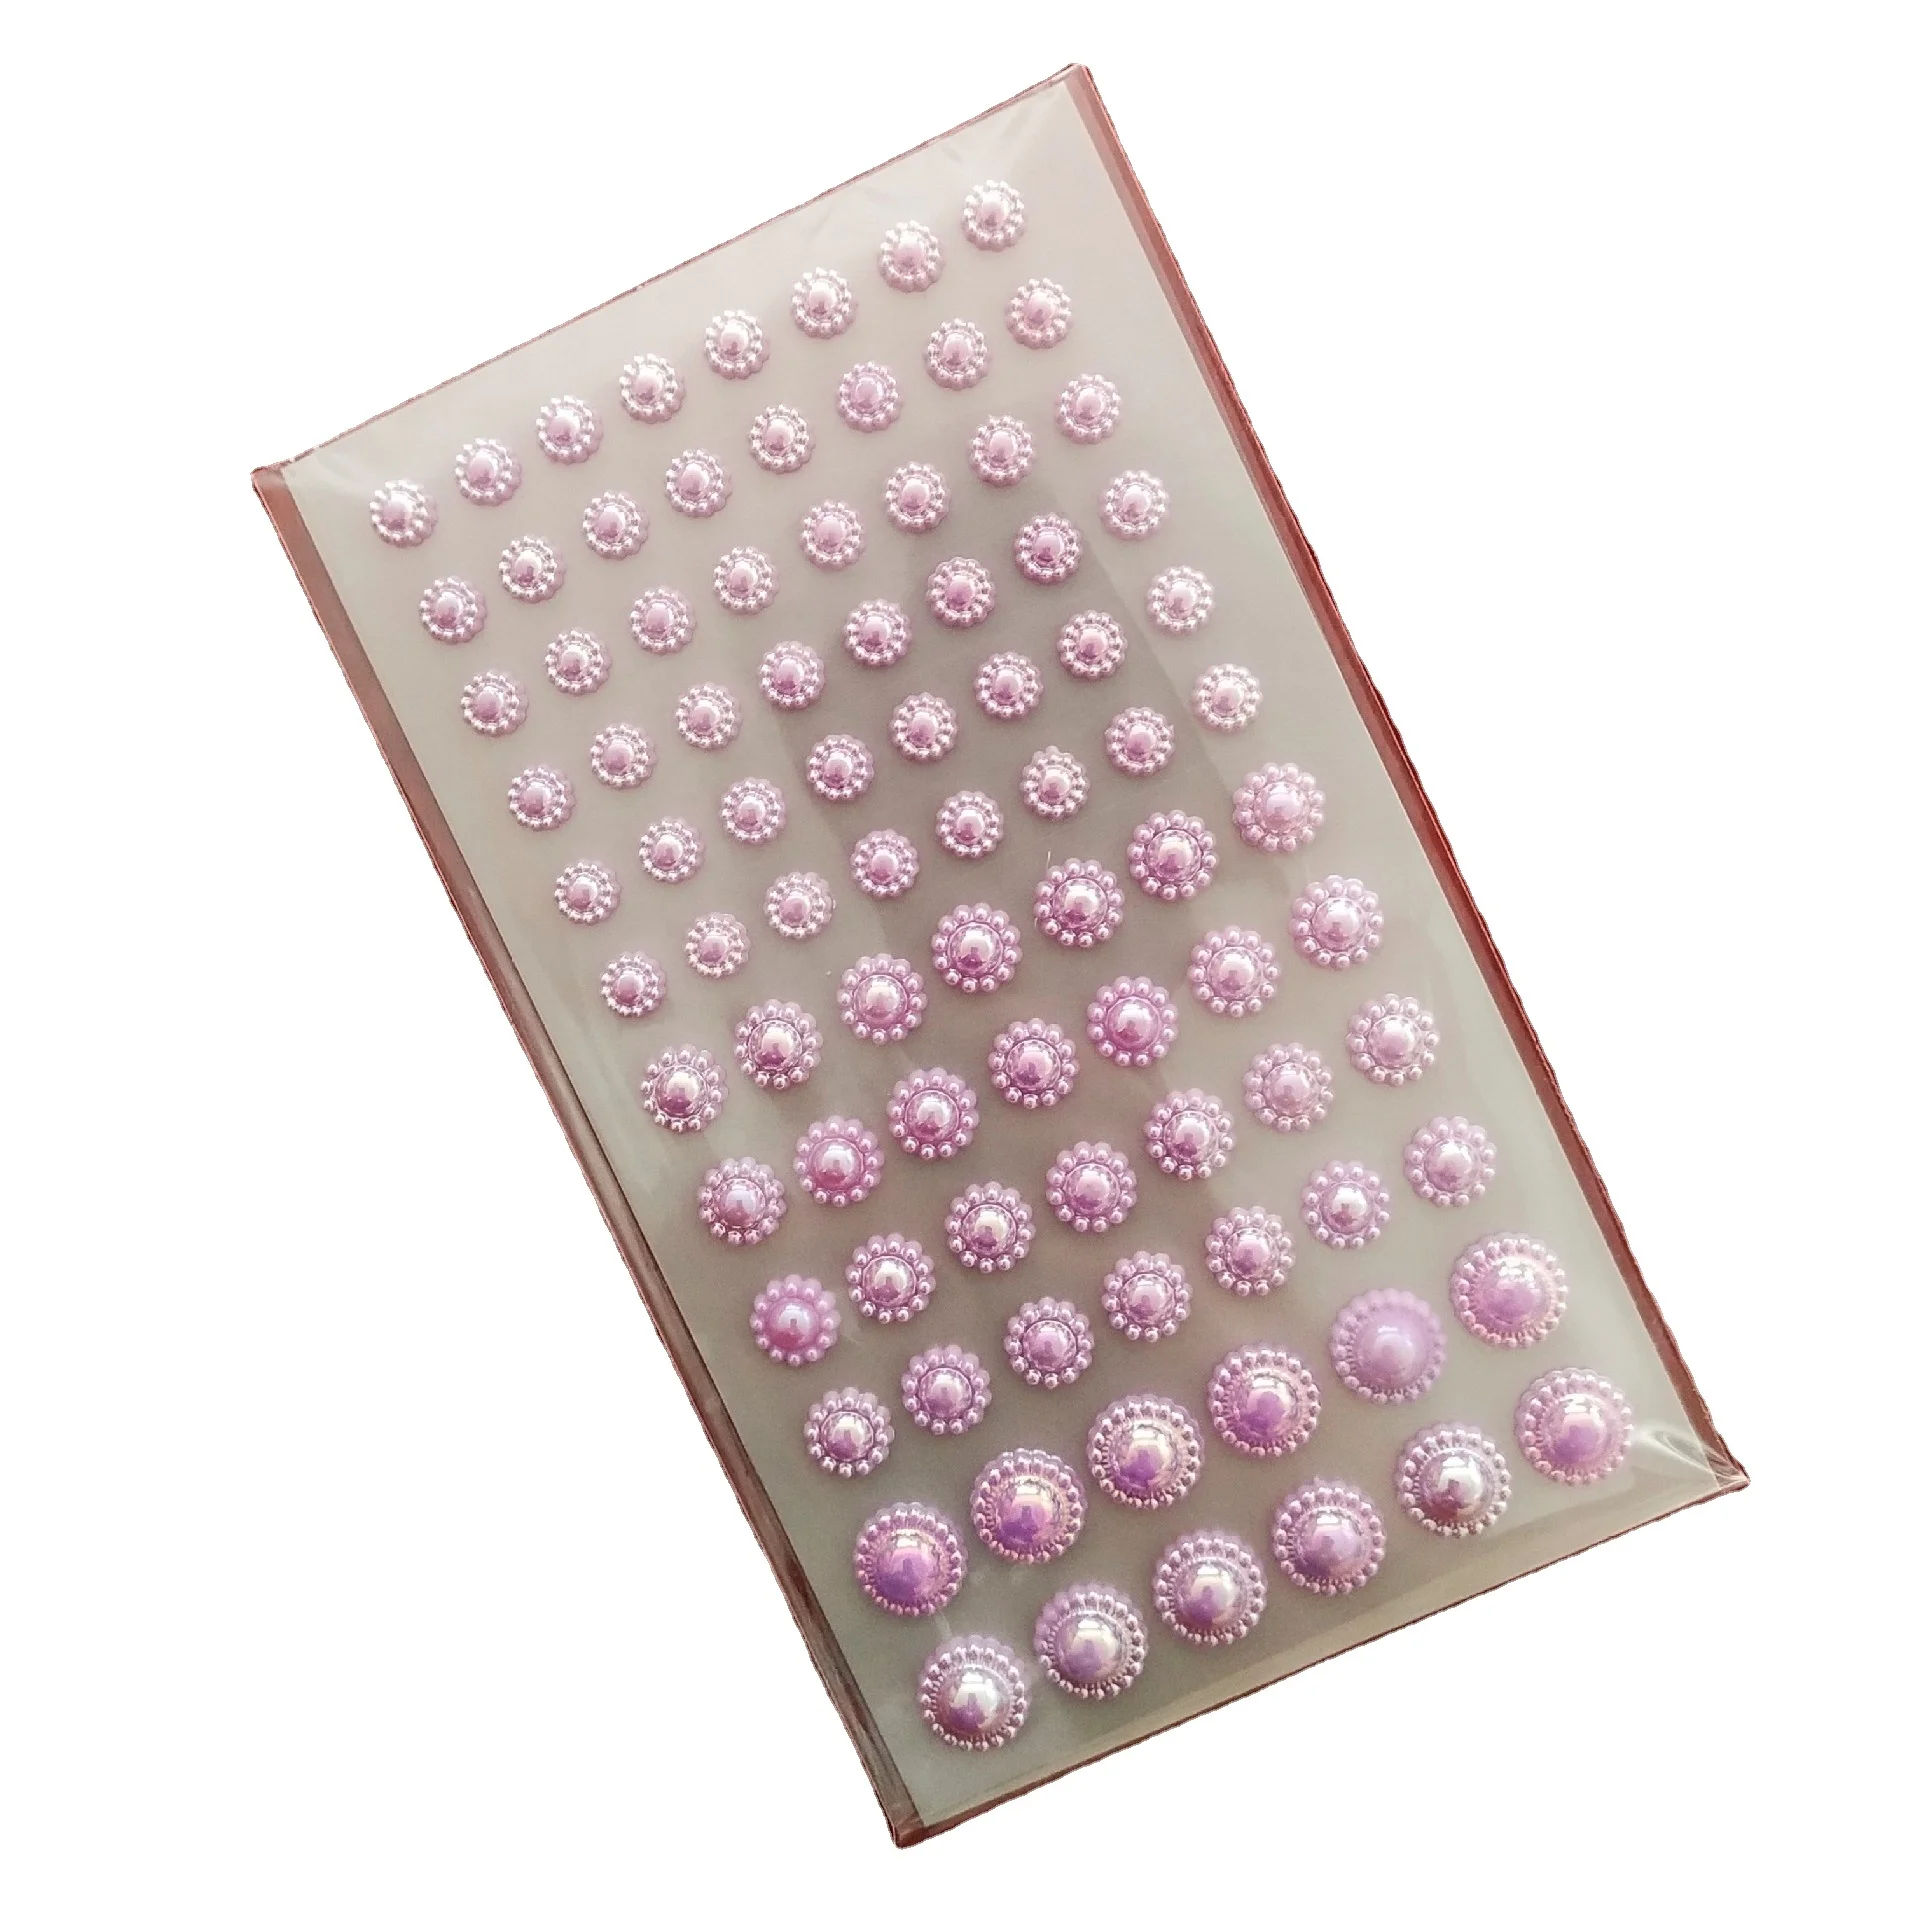 4 Sheets of Adhesive Pearl Stickers Face Pearl Diy Stickers Decorative Pearl  Stickers 